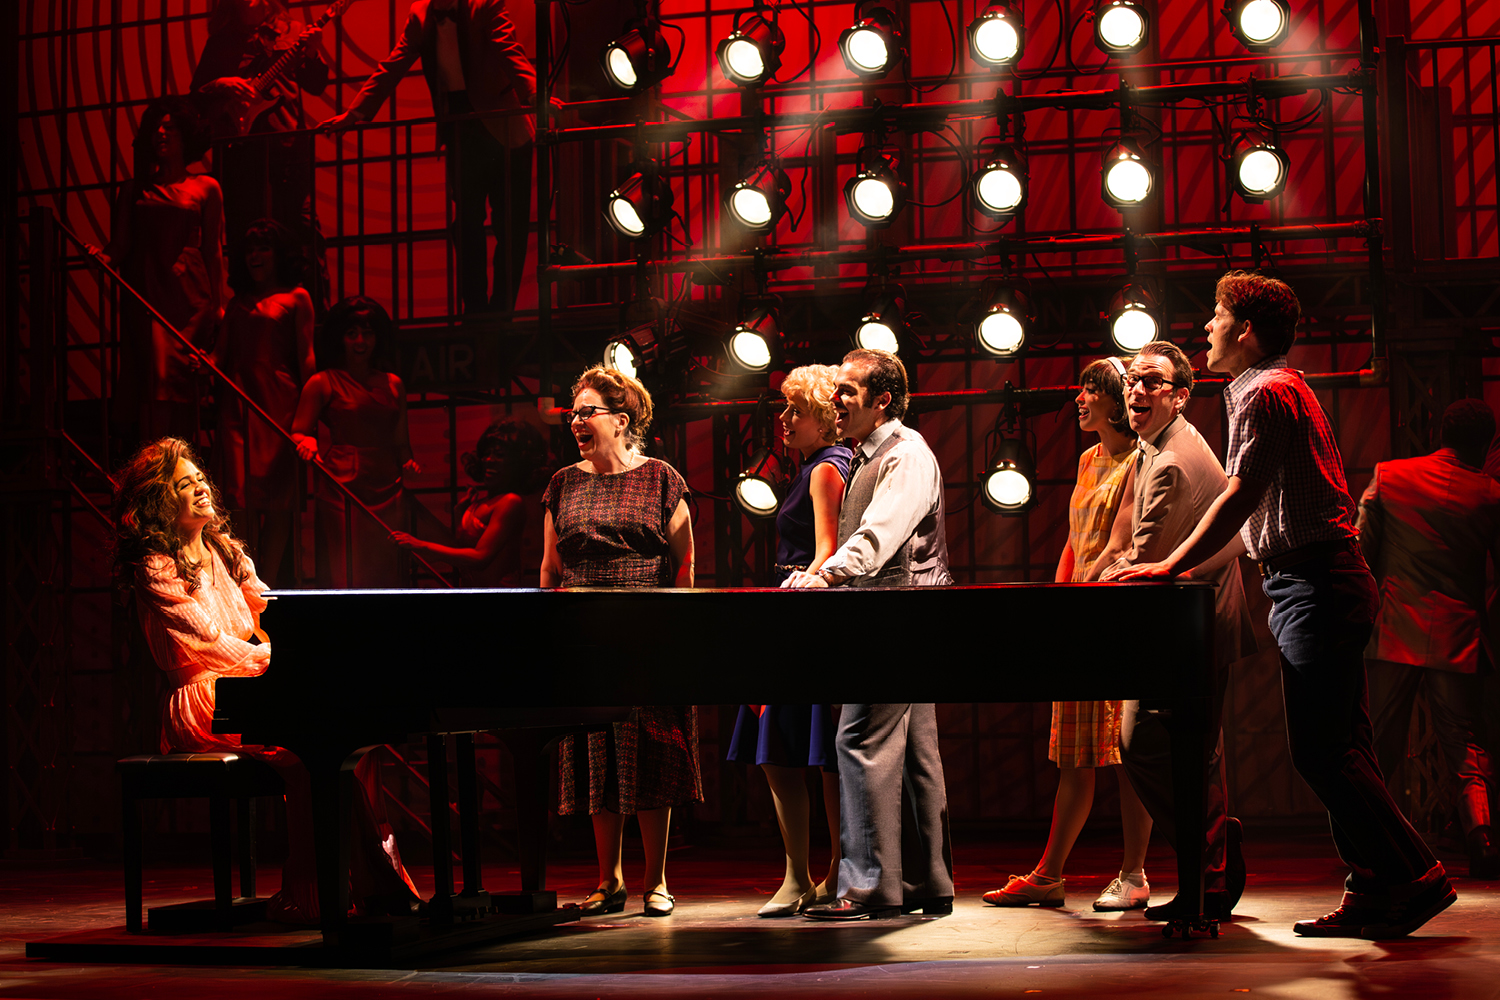 Company in Beautiful: The Carole King Musical, Drayton Entertainment, 2023 Season. Directed by John Stefaniuk; Choreographed by Hollywood Jade; Music Direction by Nico Rhodes; Set Design by Douglas Paraschuk; Costume Design by Julia Holbert; Lighting Design by Michael Walton; Stage Manager Paul Pembleton; Assistant Stage Managers Rebecca Miller and Frances Johnson.